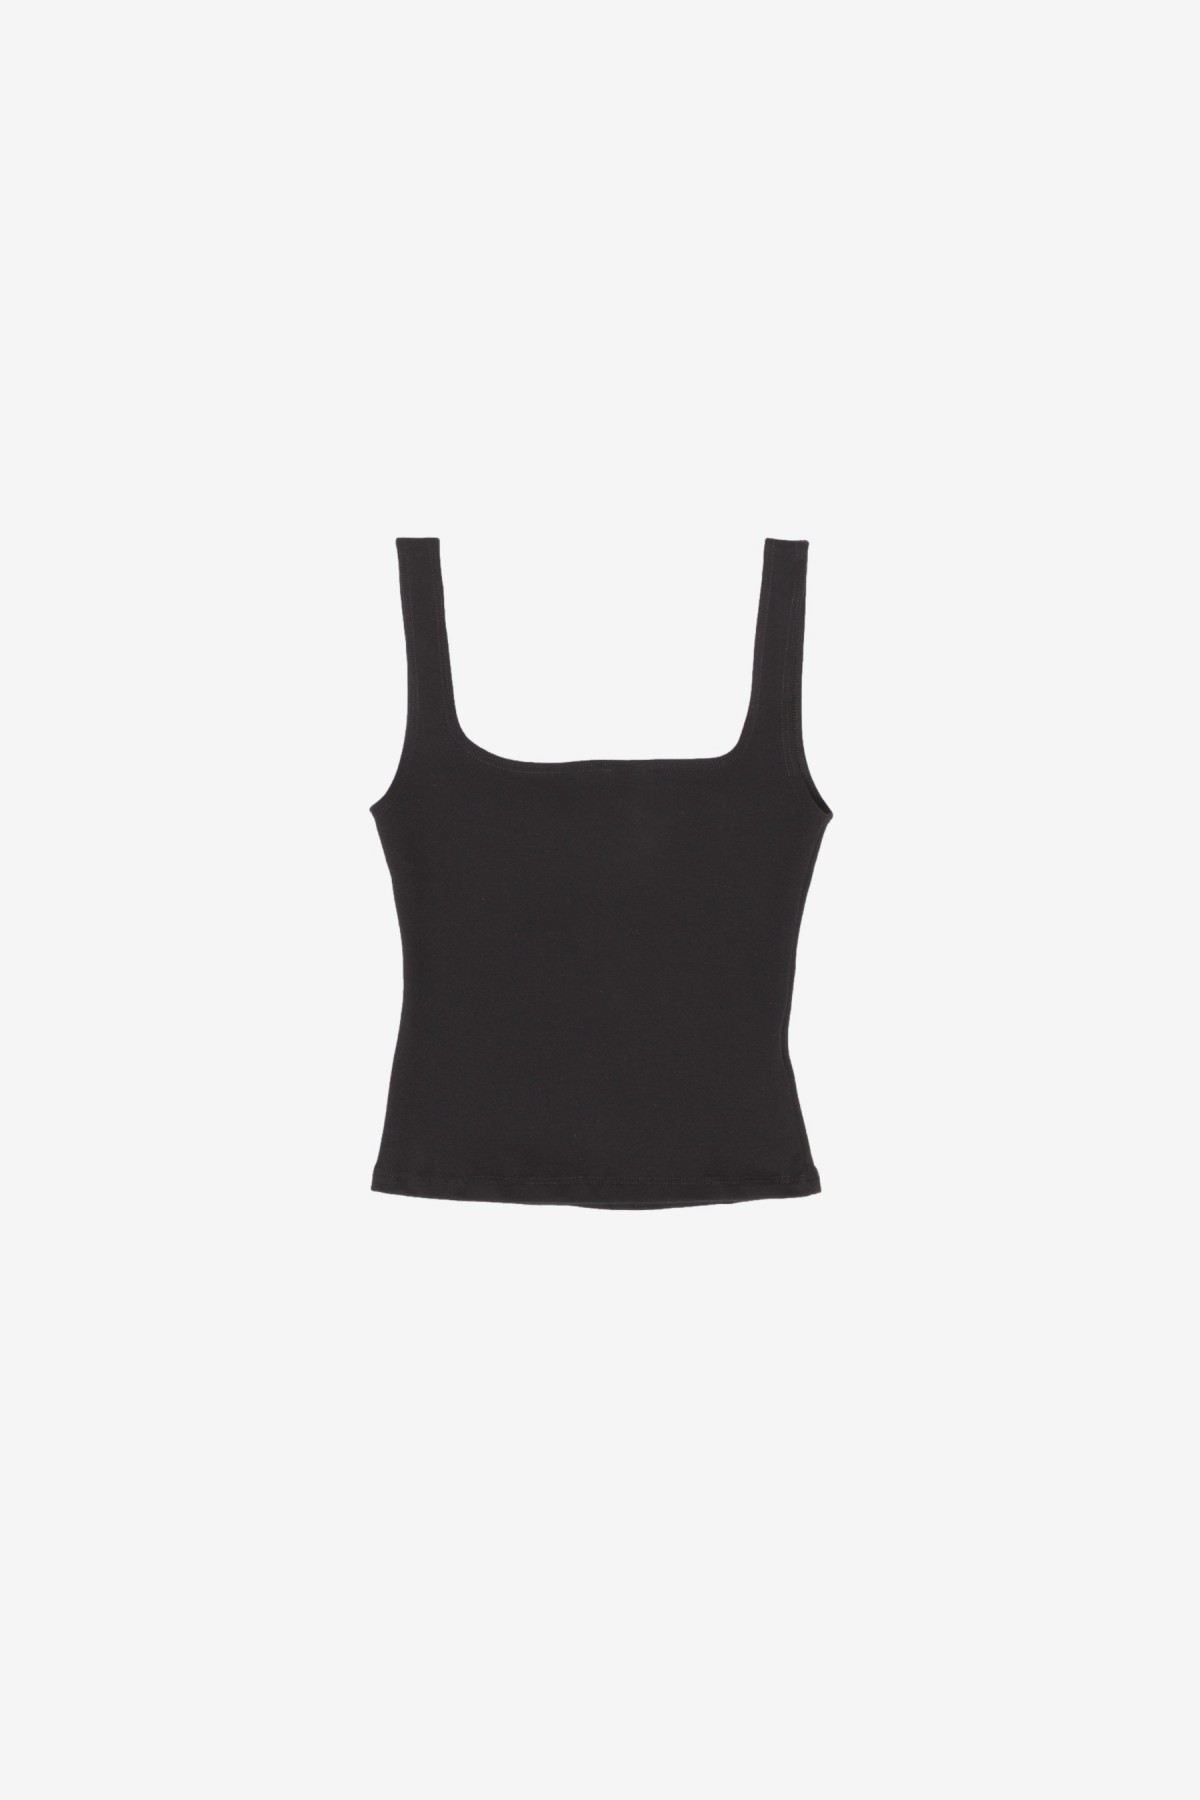 Gil Rodriguez Matisse Scooped Tank in Black